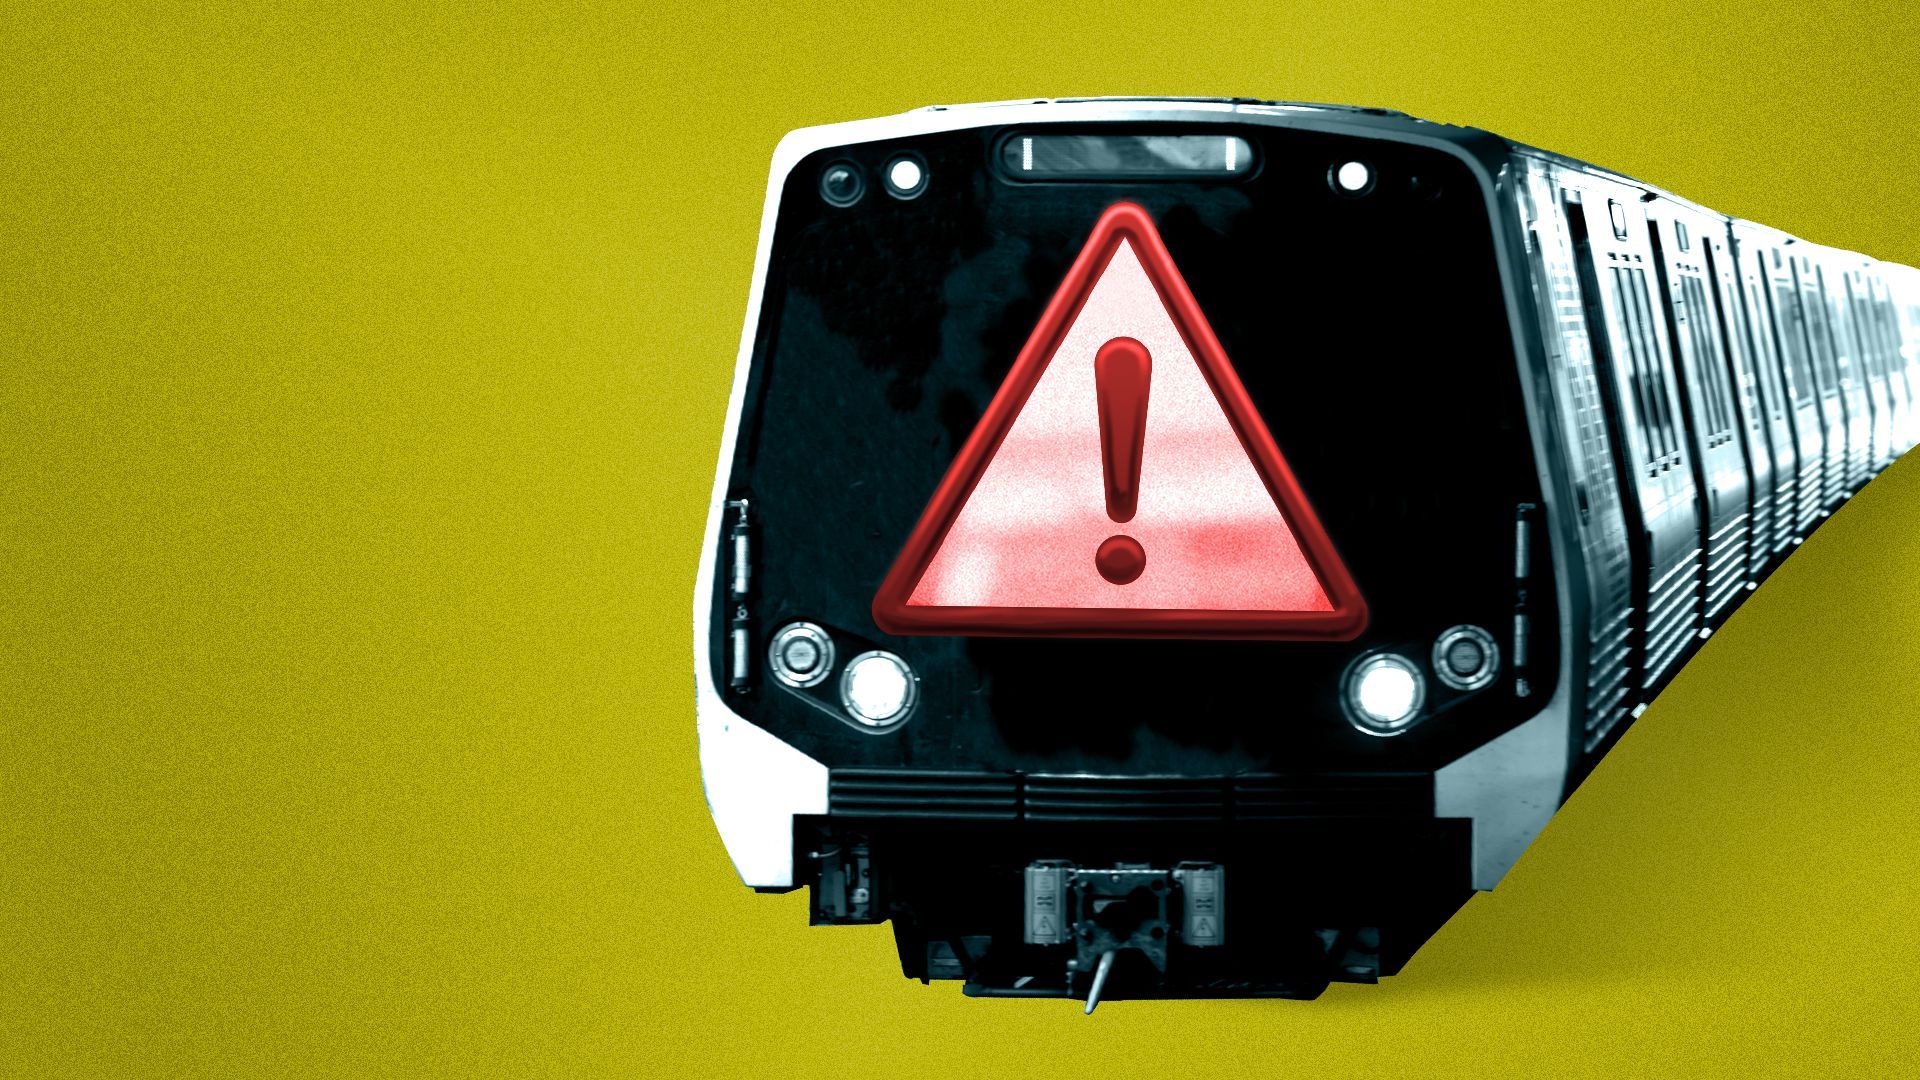 Illustration of a Metro train with a front window shaped like a danger sign.